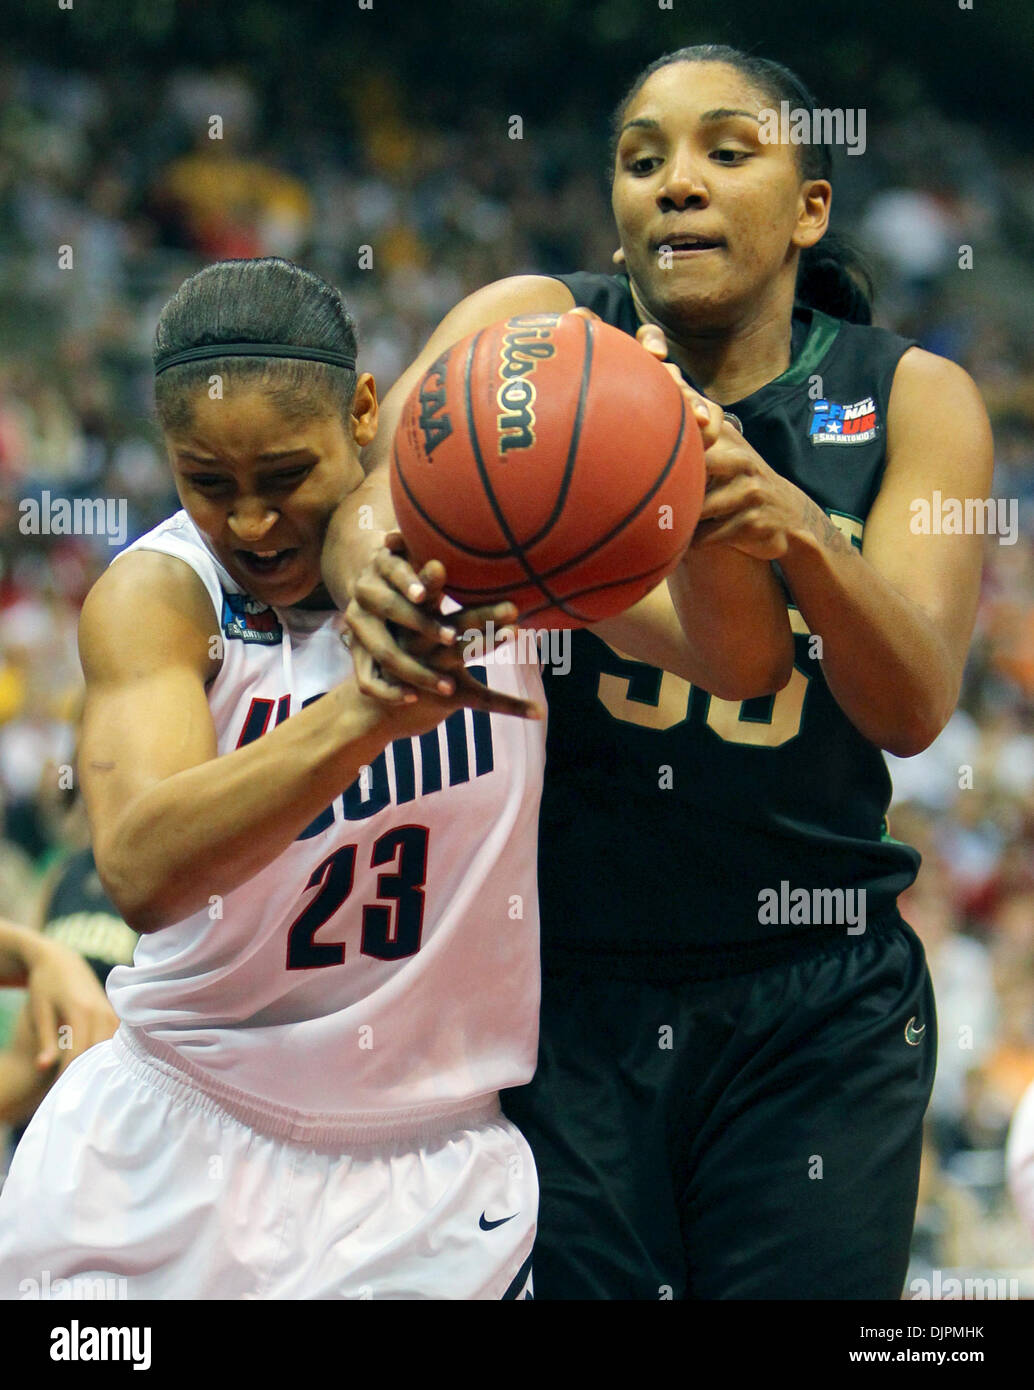 Apr. 04, 2010 - San Antonio, TX, USA - UConn's Maya Moore frights with Baylors Morghan Medlock during their semi-final game in the NCAA Women's Final Four at the Alamodome in San Antonio, Texas Sunday night April 4, 2010. (Credit Image: © San Antonio Express-News/ZUMApress.com) Stock Photo